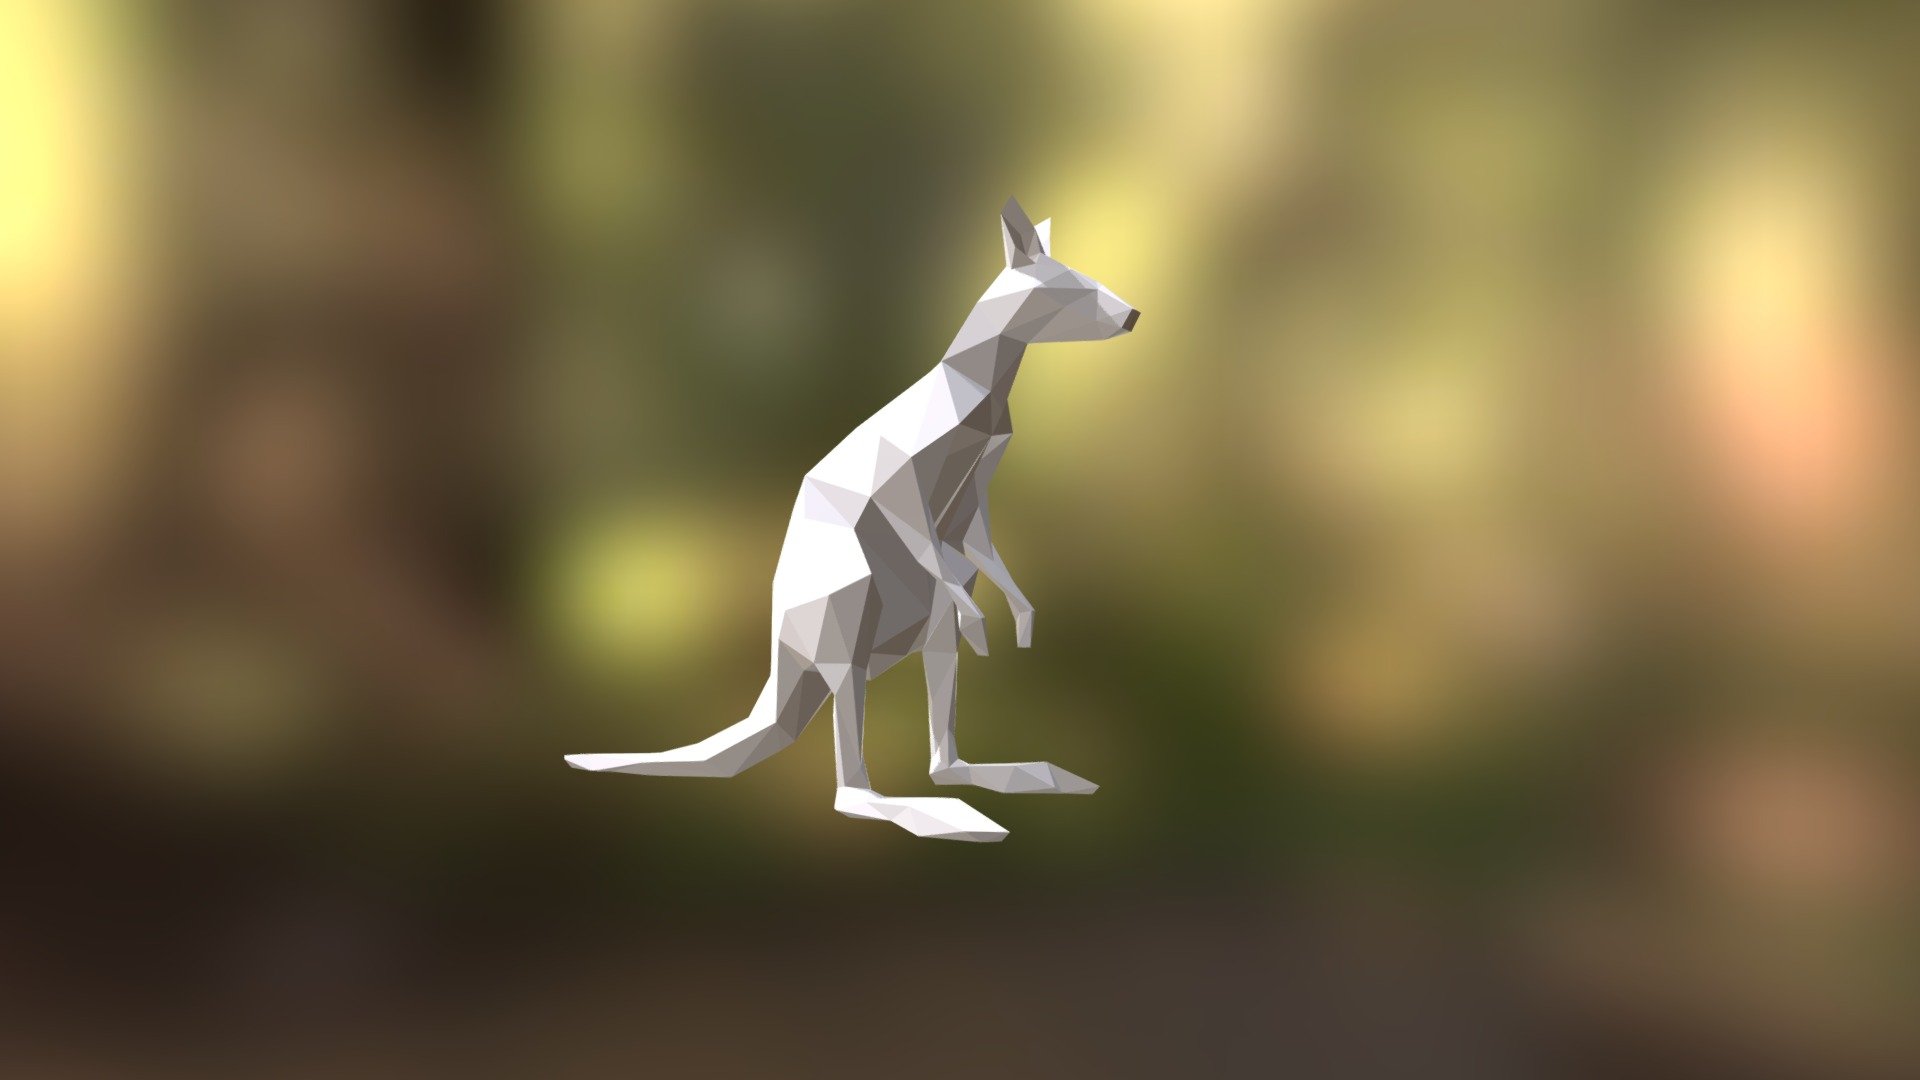 Low Poly 3D model for 3D printing. Kangaroo Low Poly sculpture. You can find this model for 3D printing in my shop: -link removed- Reference model: http://www.cadnav.com - Kangaroo low poly model for 3D printing - 3D model by Peolla3D 3d model